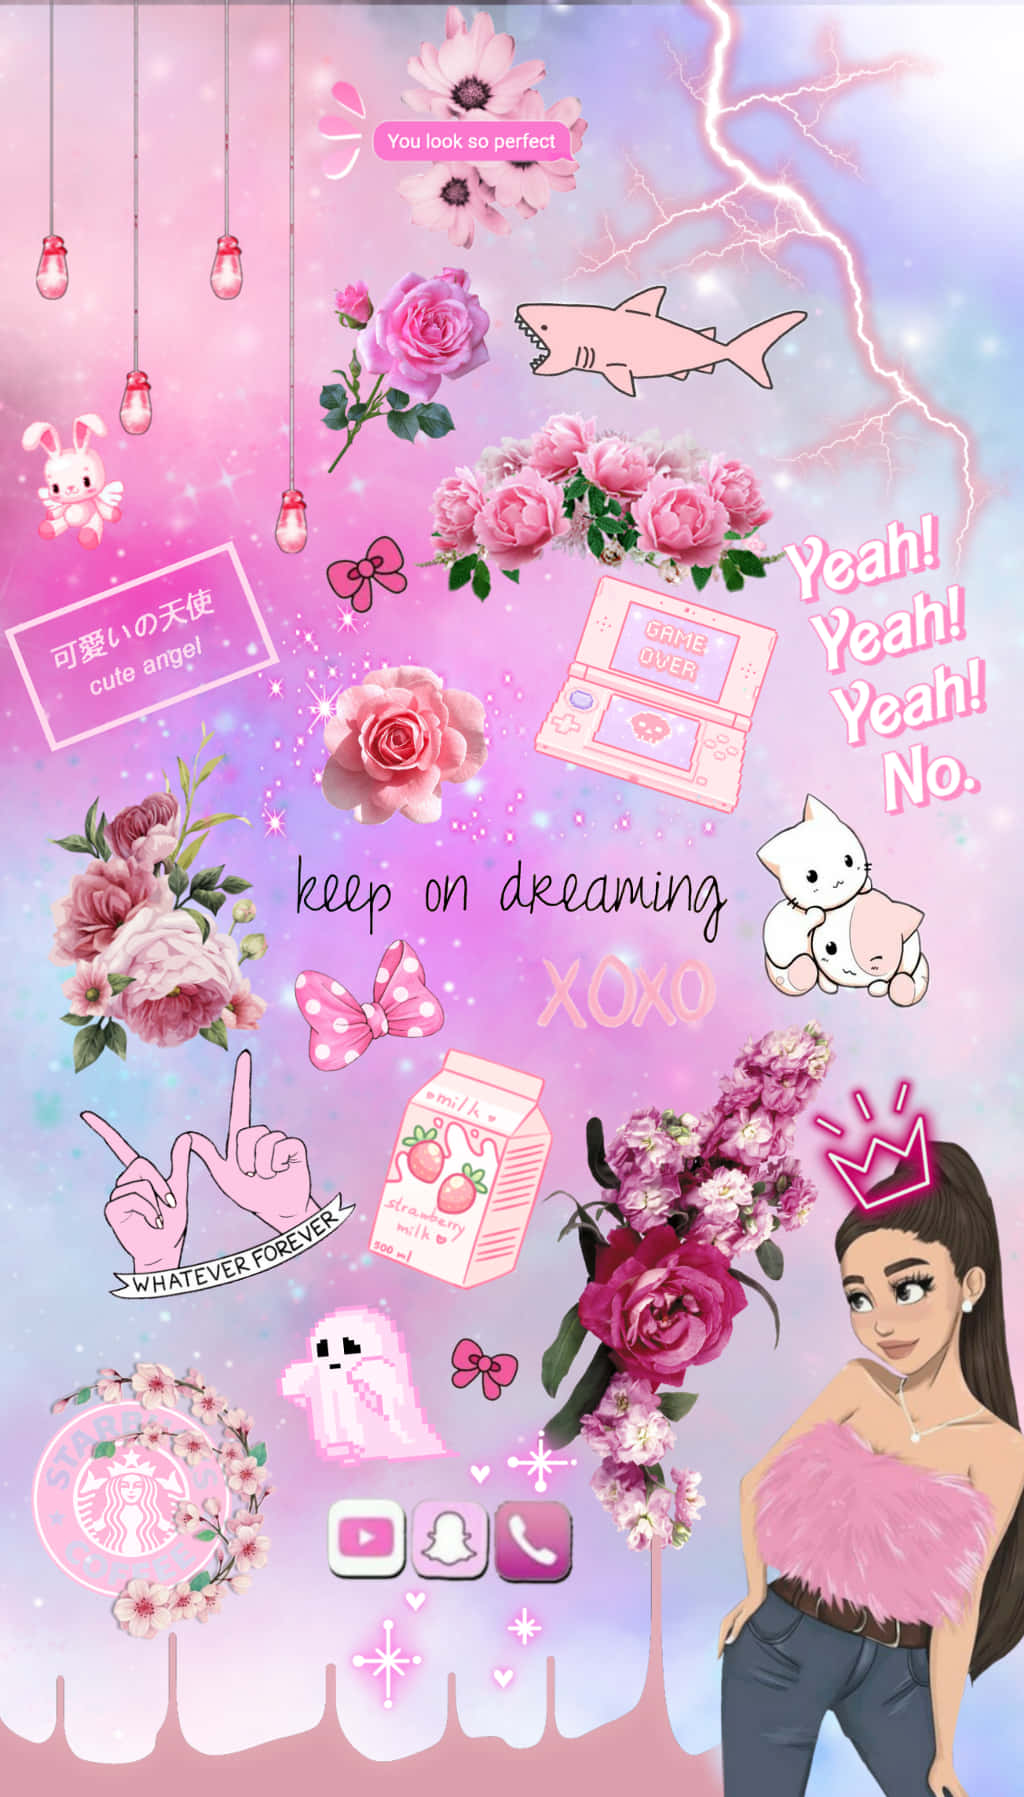 Girly Tumblr Cute Sticker Collage Wallpaper